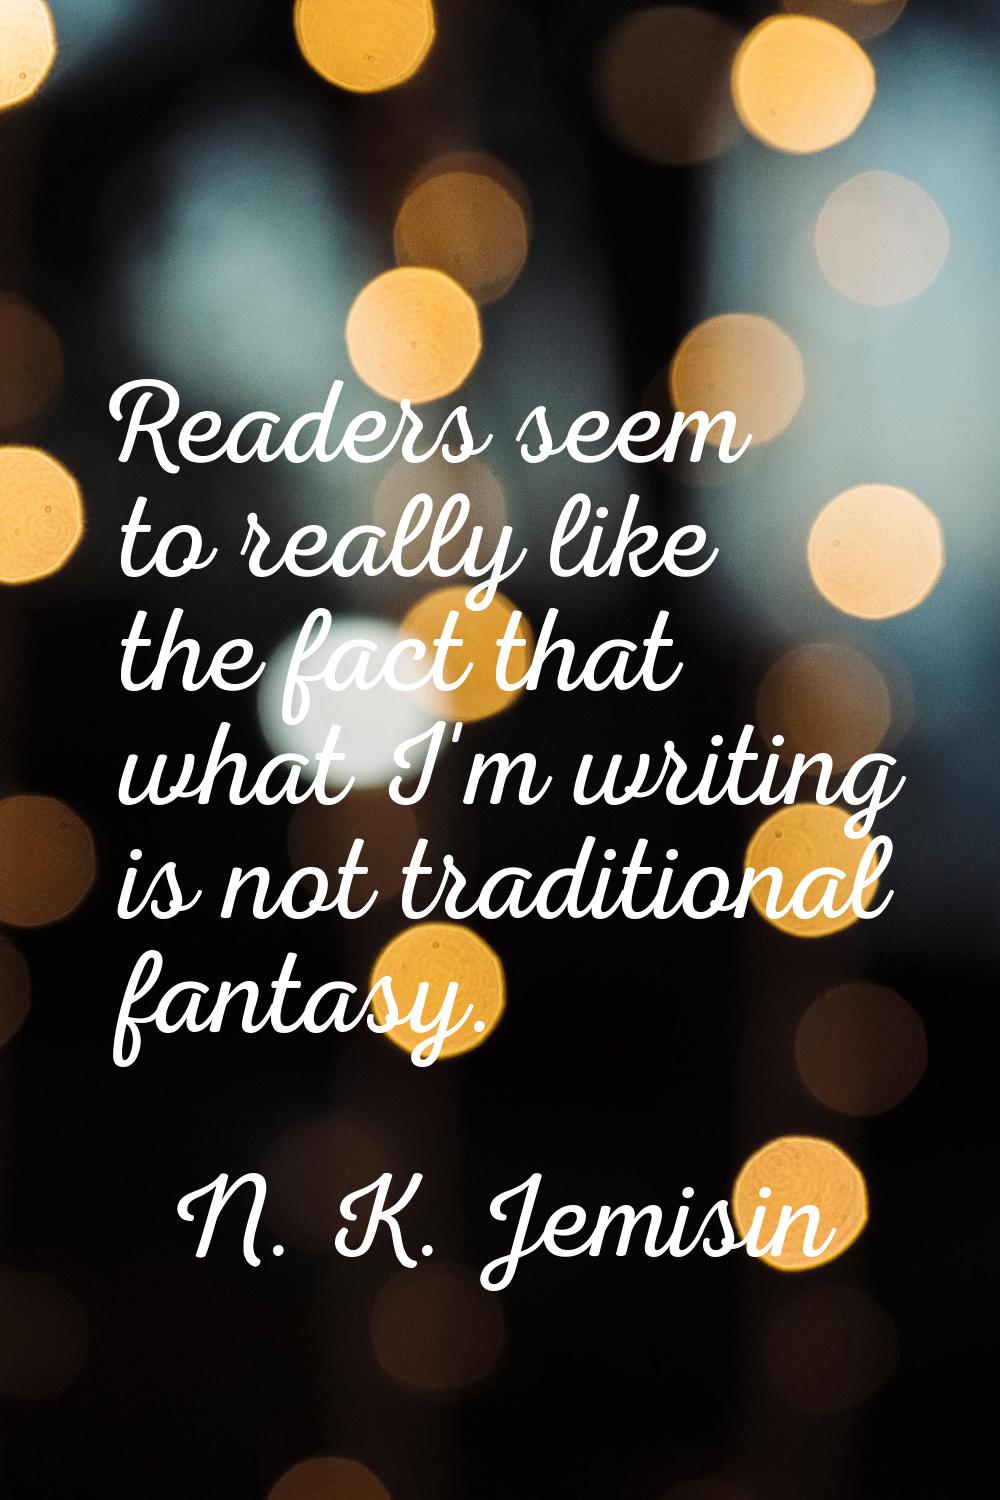 Readers seem to really like the fact that what I'm writing is not traditional fantasy.